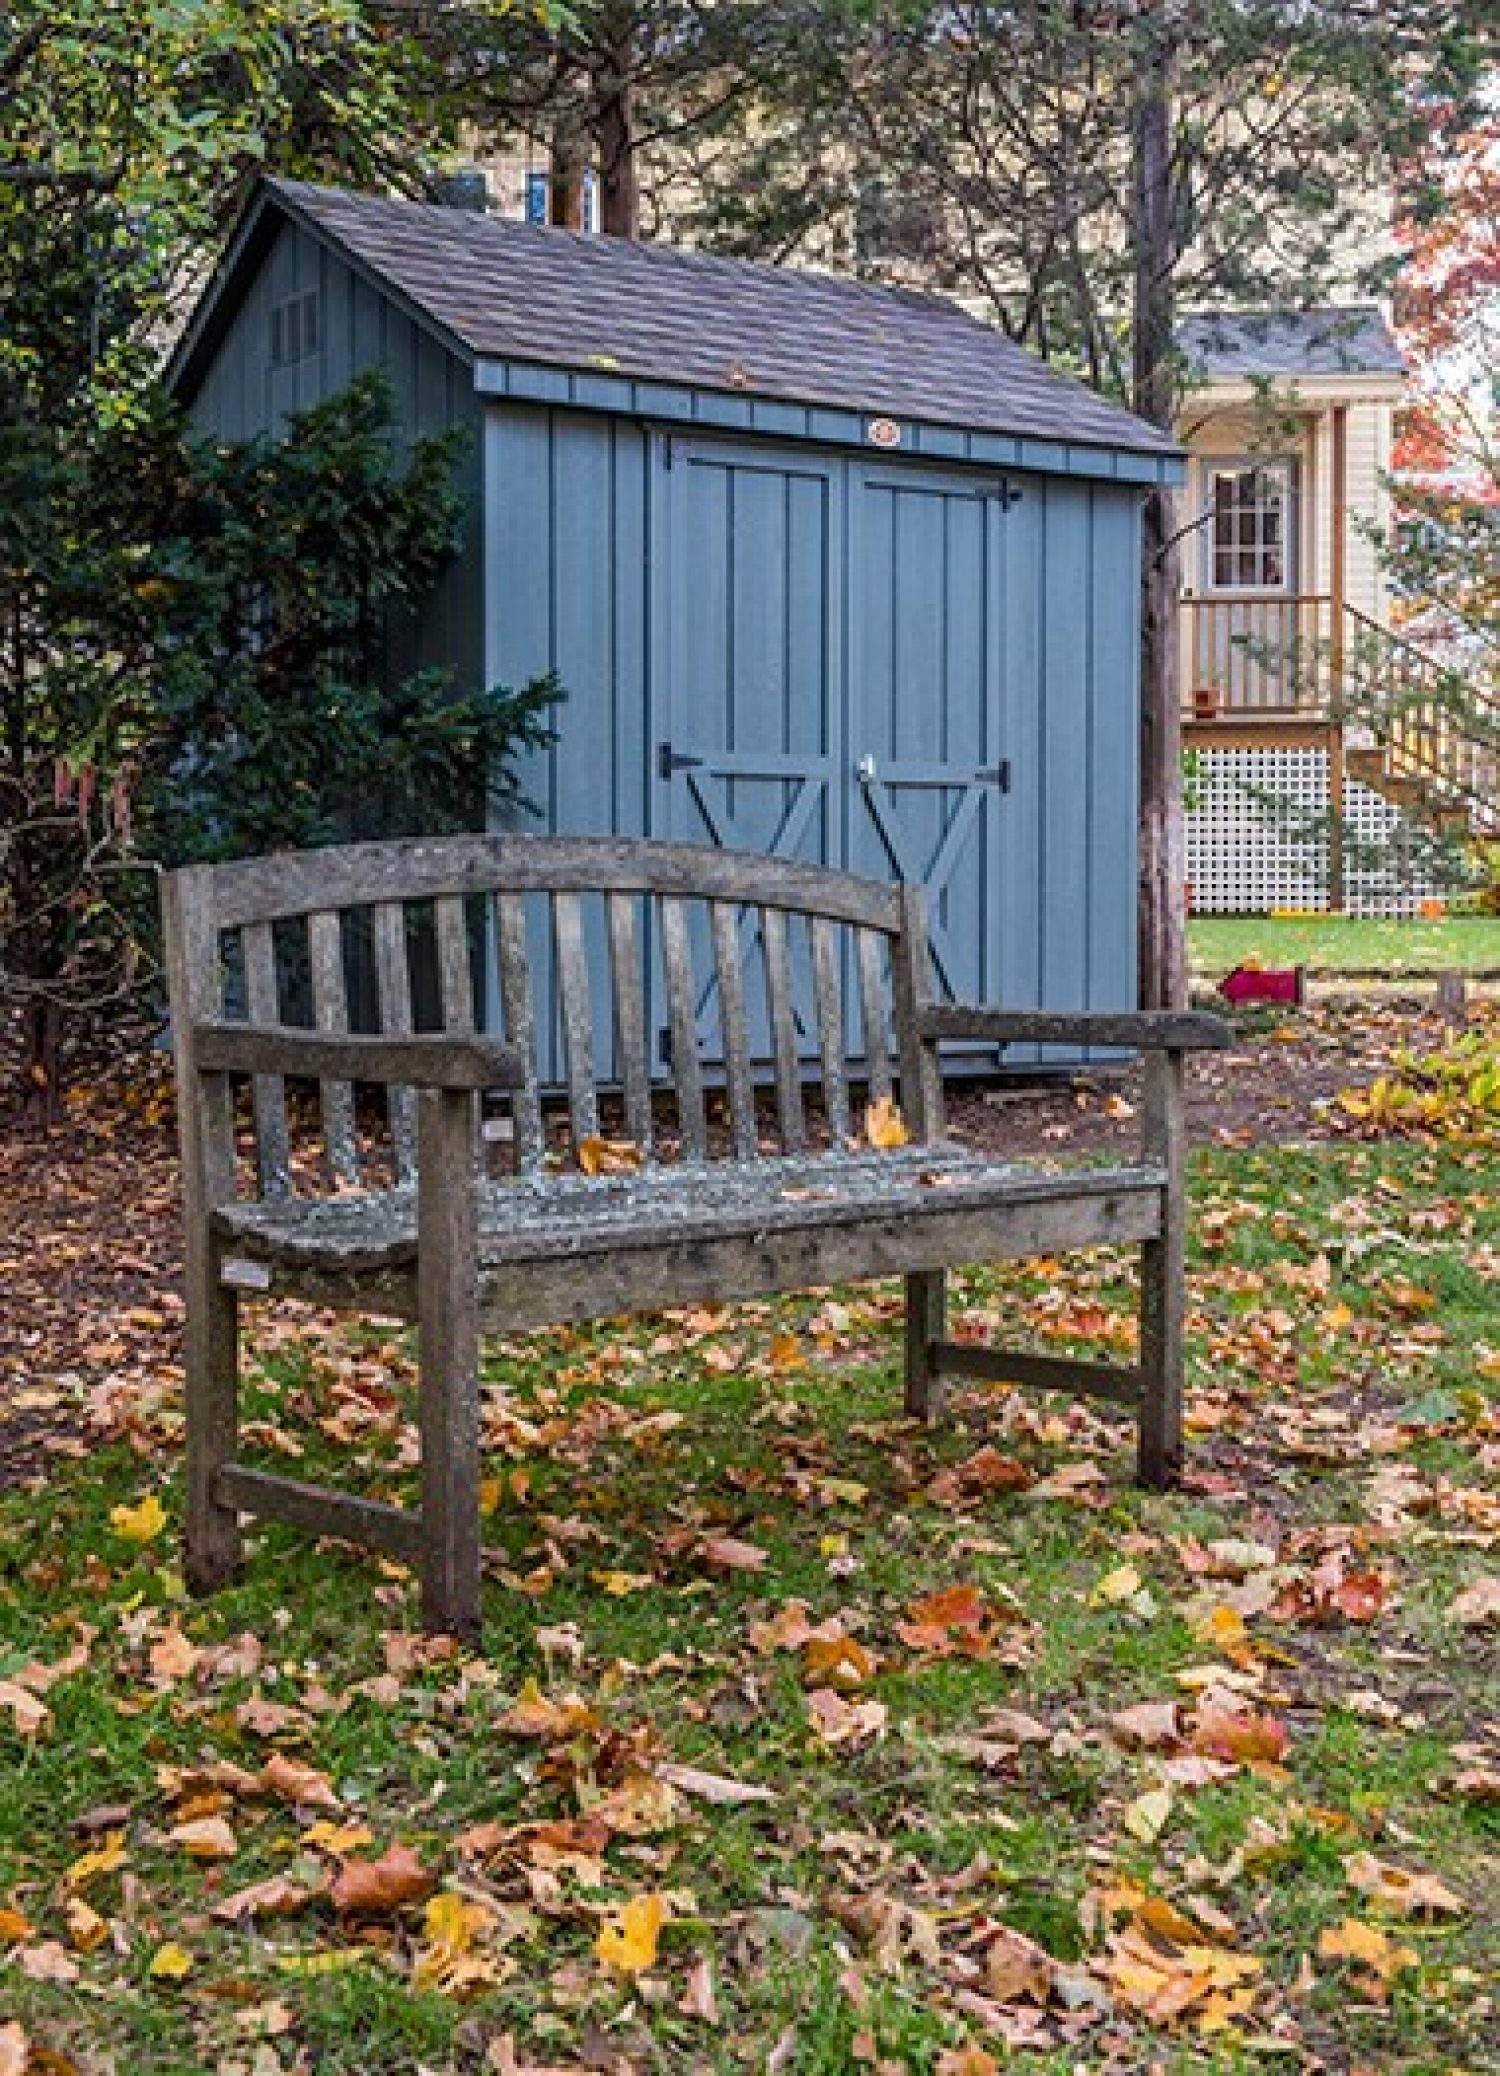 A bench in front of a blue shed